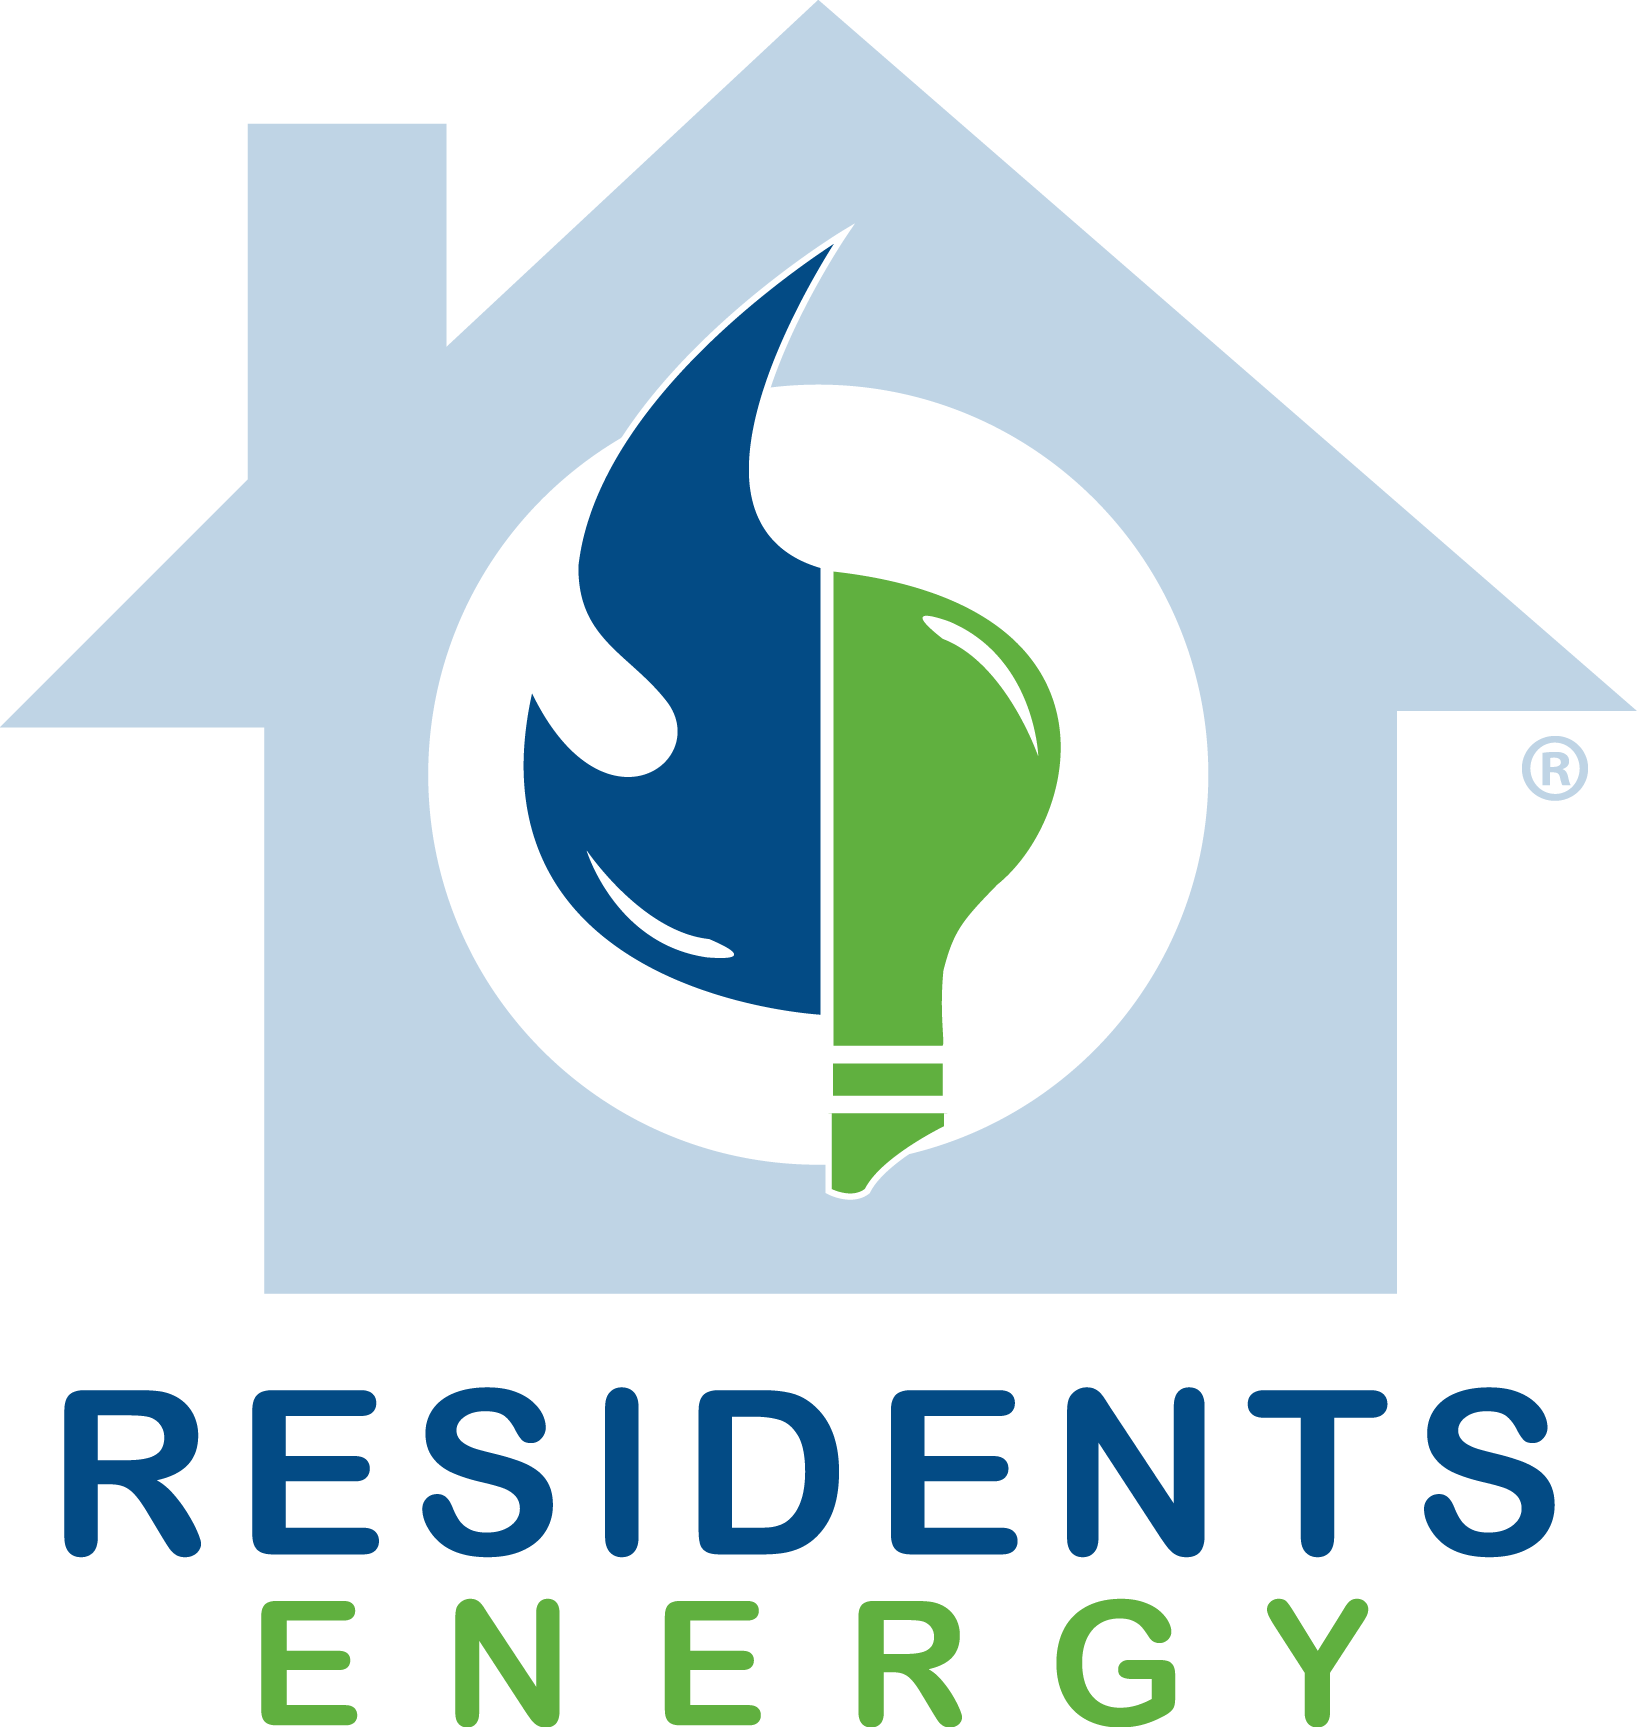 Click to see details for Residents Energy, LLC offer. Price 0.316